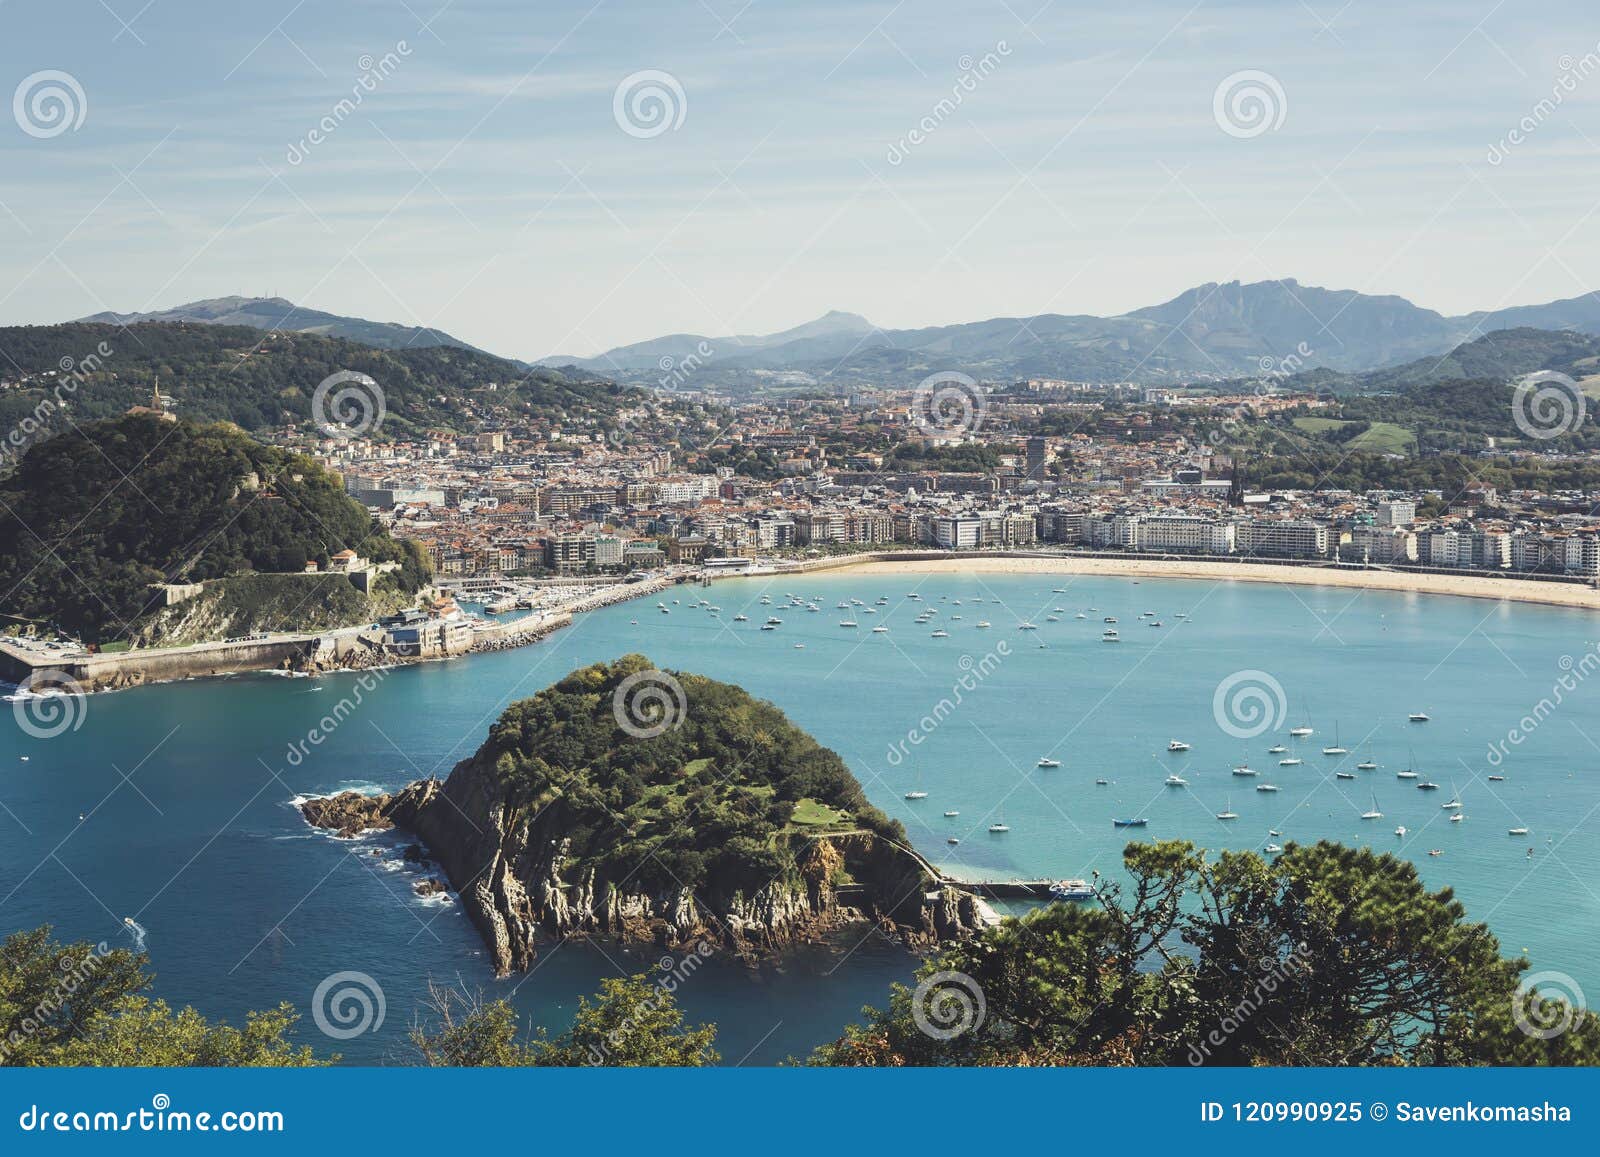 Observation Deck in Trip Holiday in San Sebastian Northern Spain Basque Country, Top View on Seascape on Mountain and Island in Oc Stock Image - Image of blue: 120990925